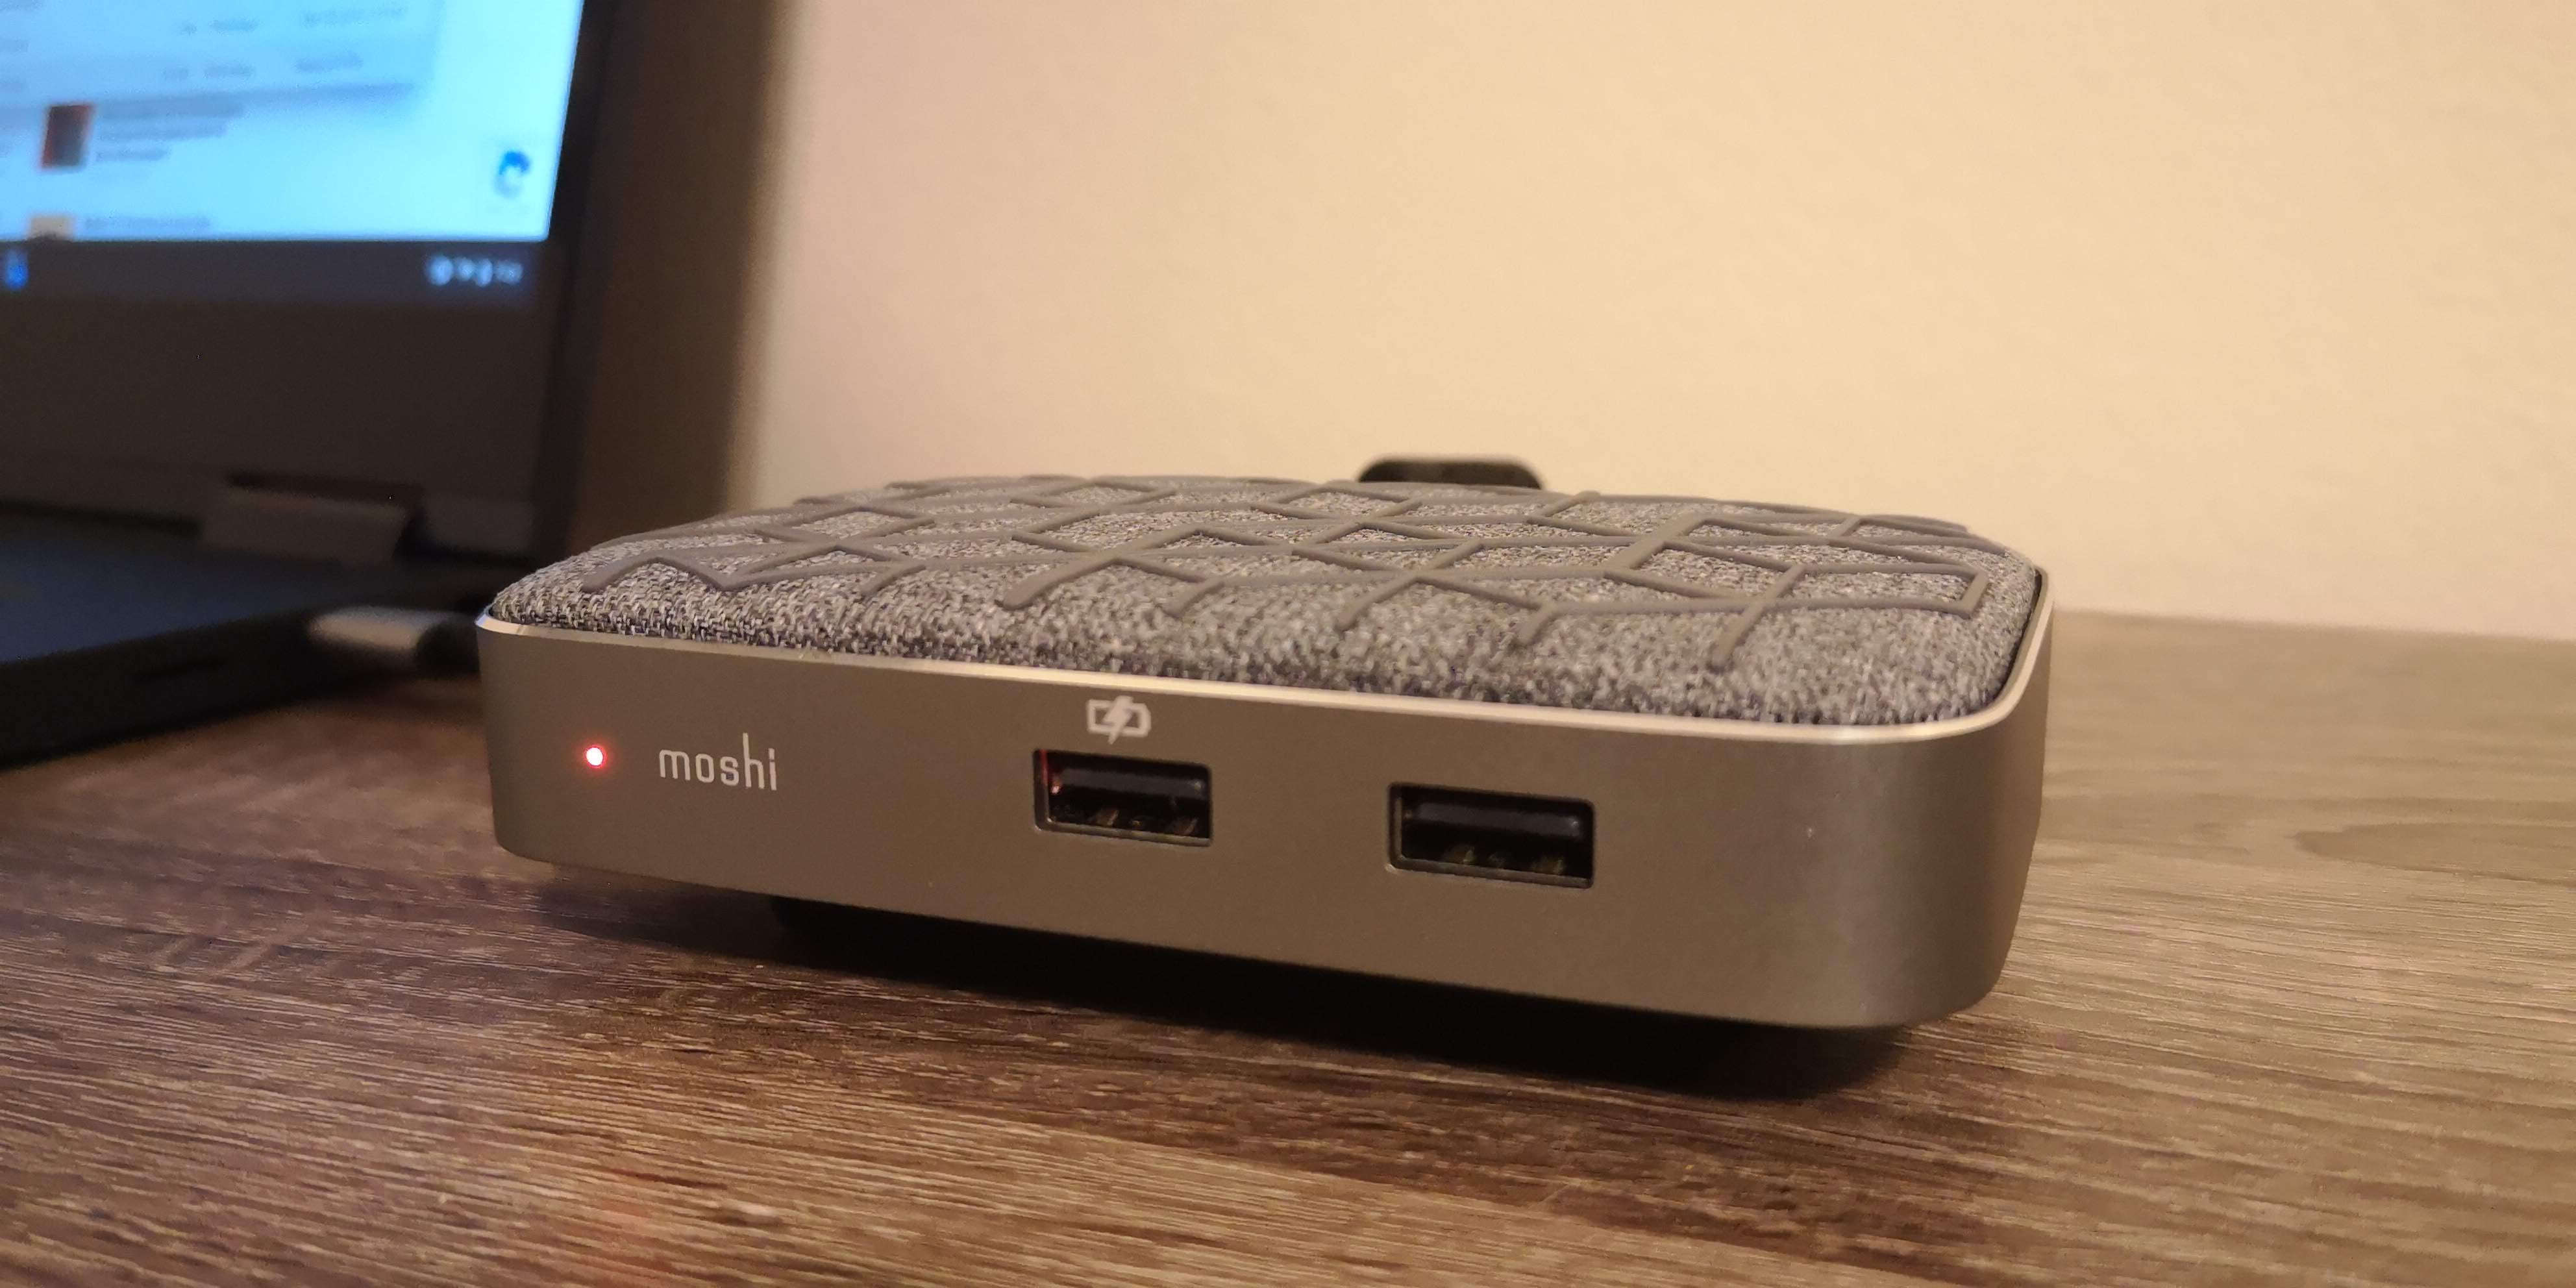 Moshi Symbus Q Review: Swiss Army knife for Chromebooks - 9to5Google